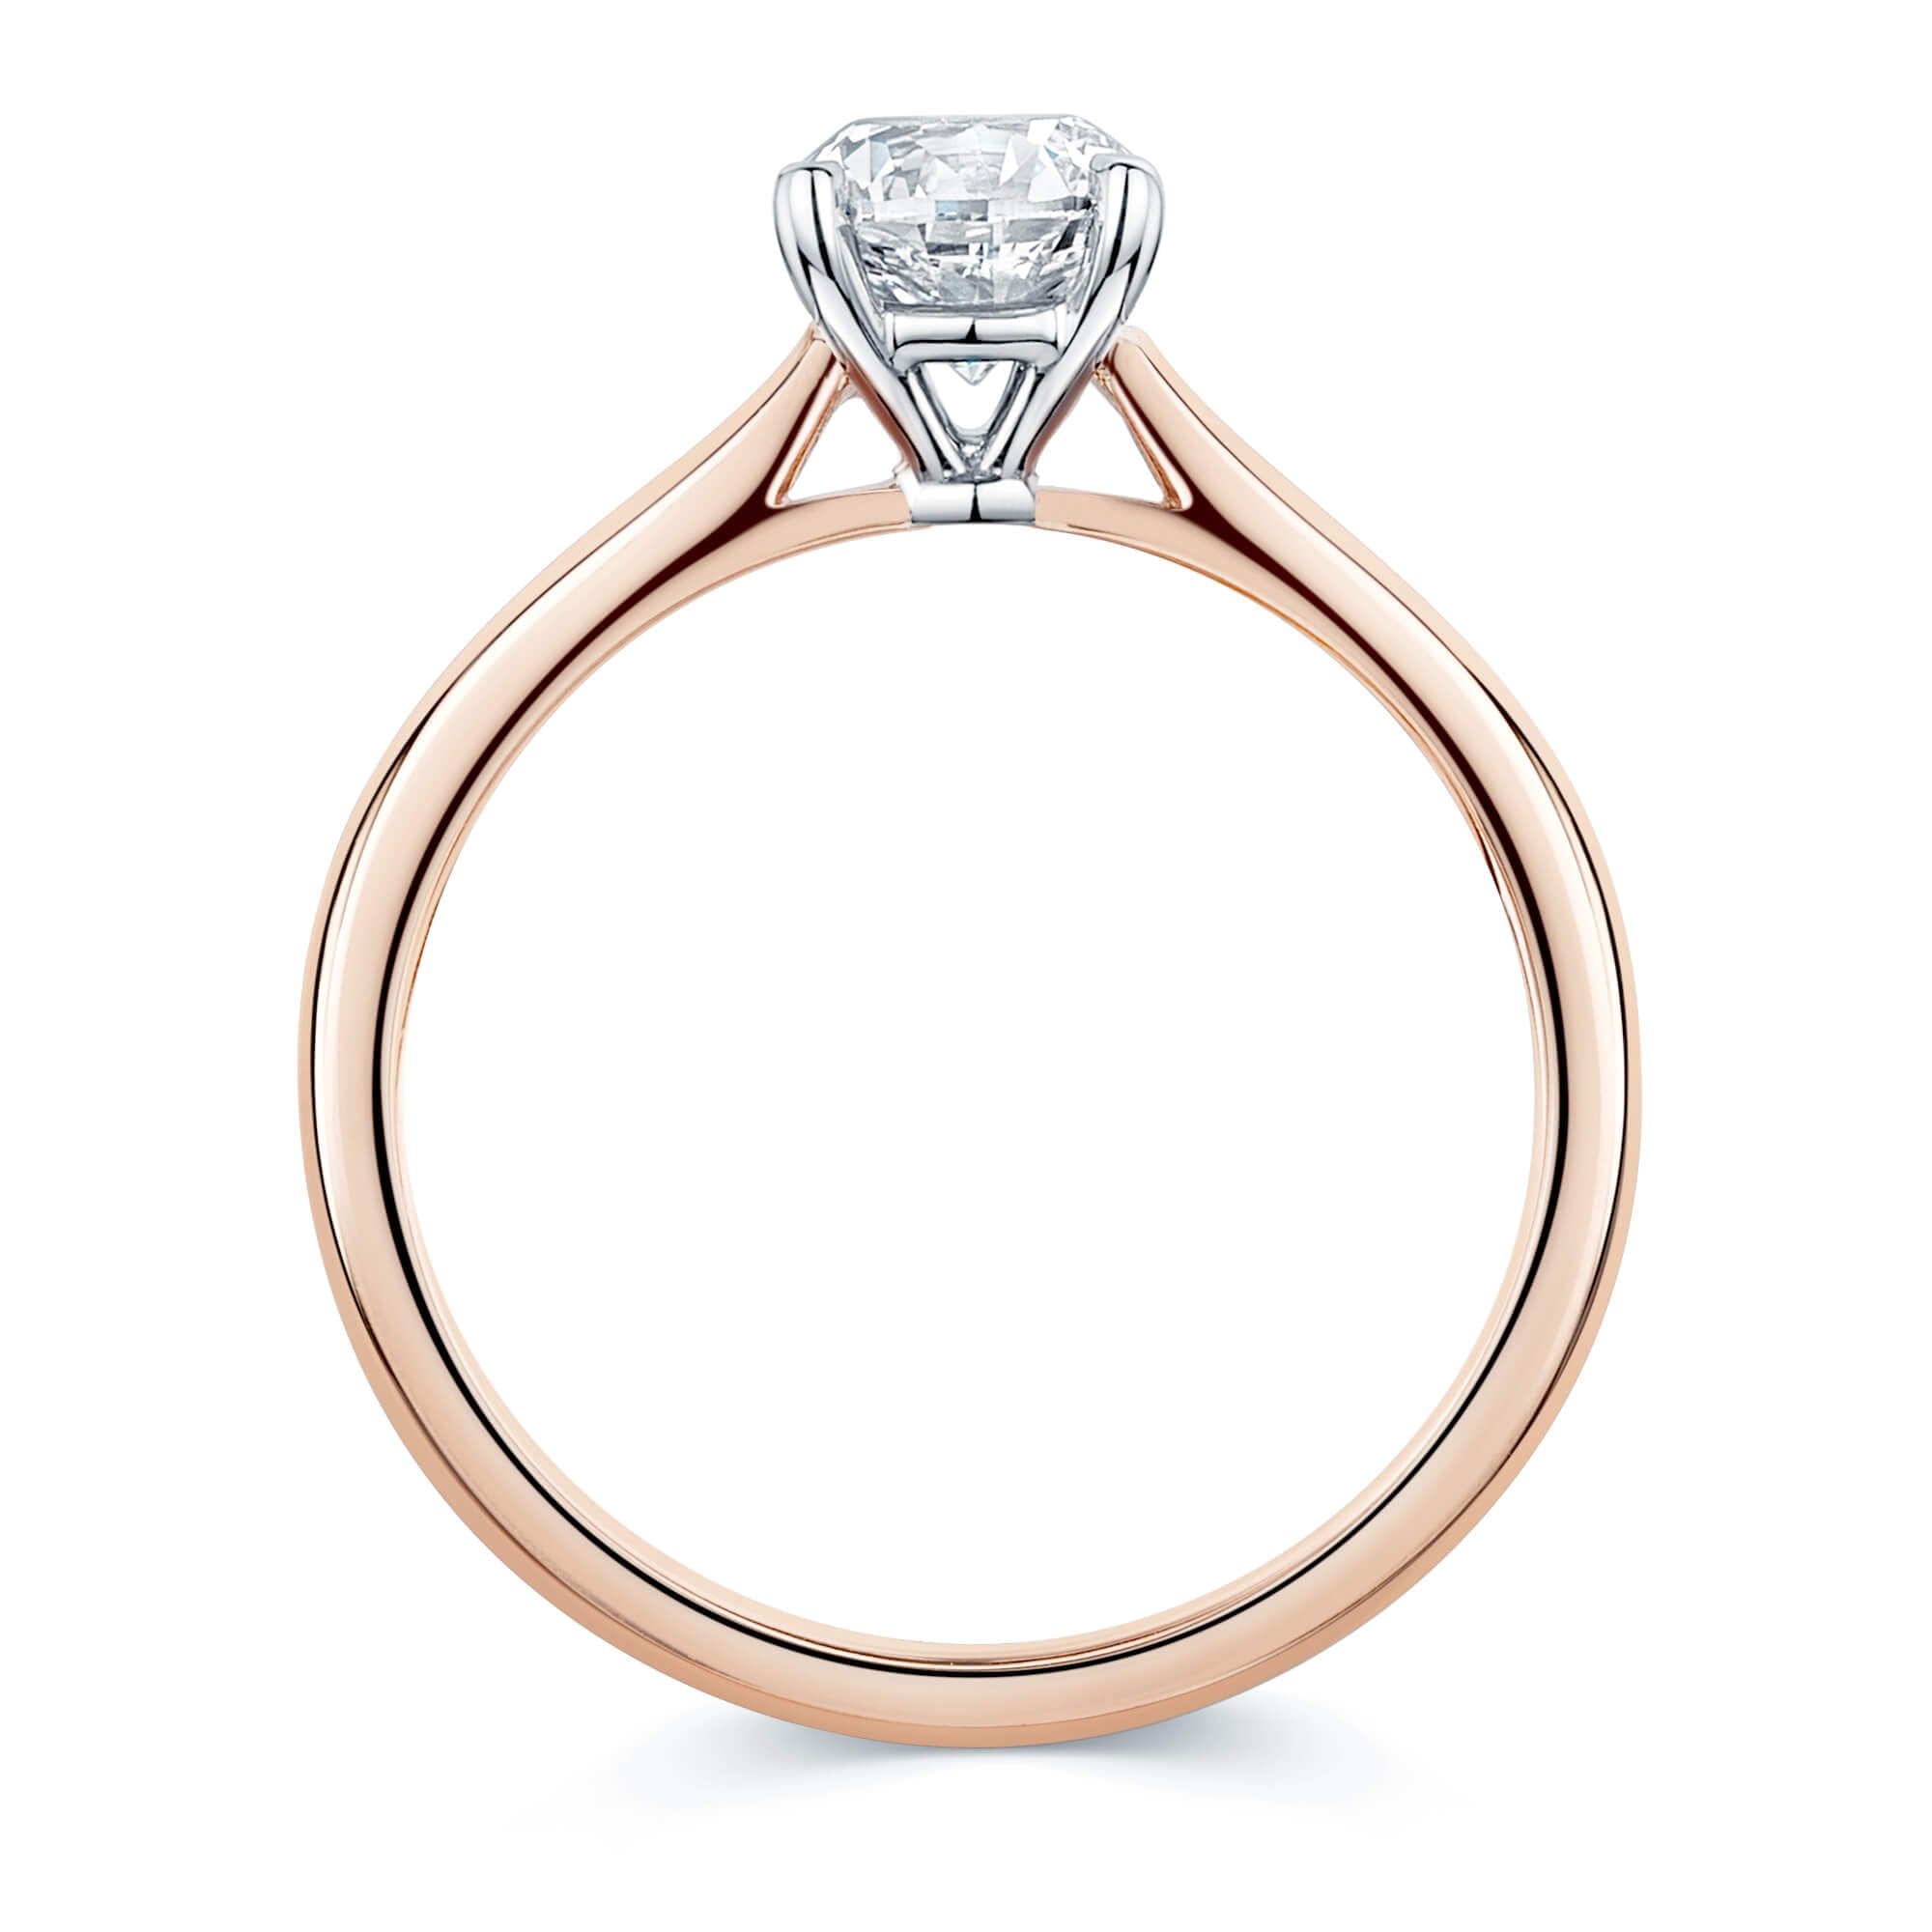 Simply Solitaire Collection 18ct Rose Gold Diamond Solitaire Engagement Ring GIA Certified 1.00 Carat